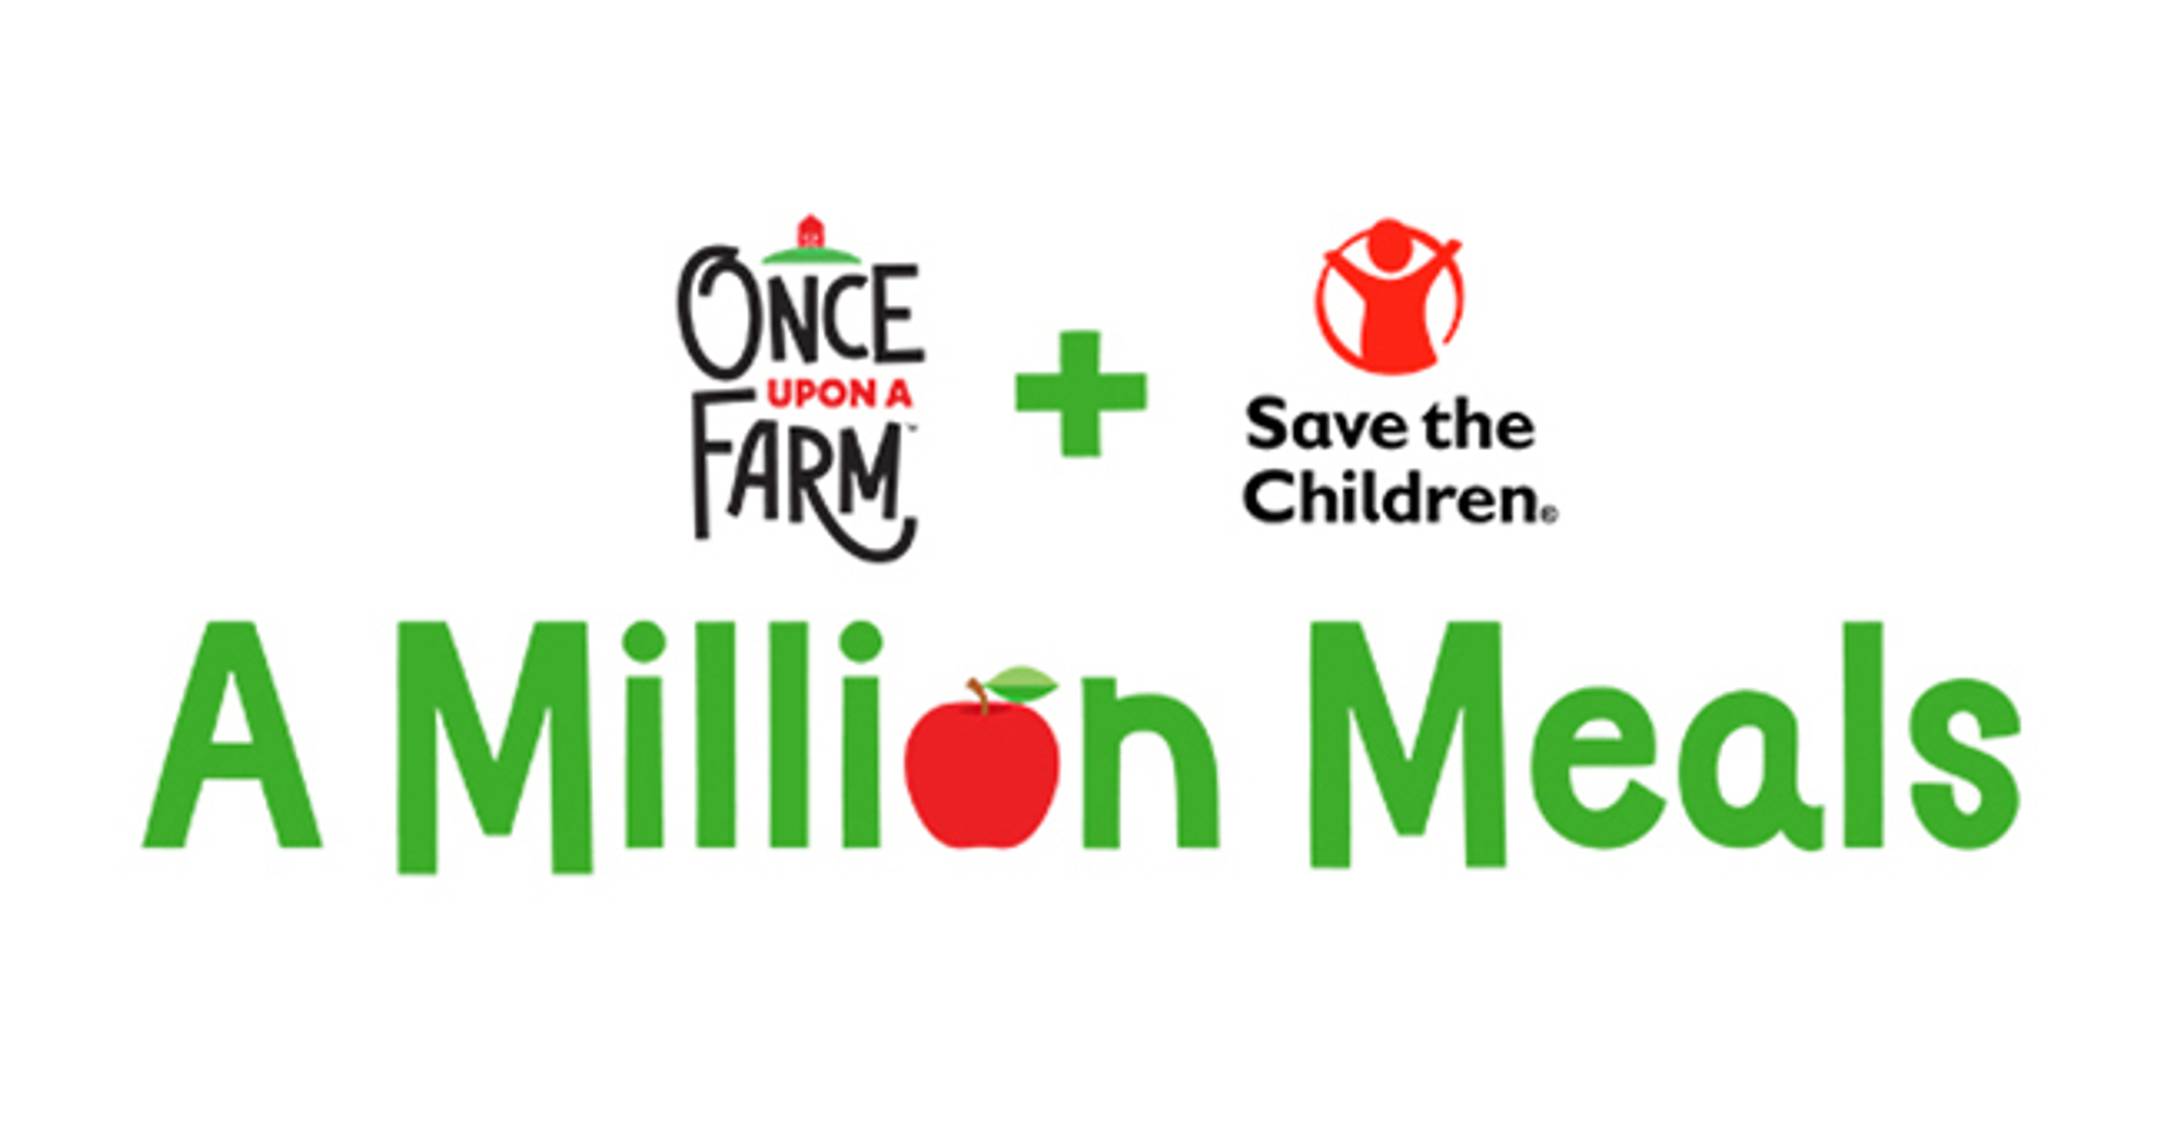 Once Upon a Farm and Save the Children A Million Meals logo